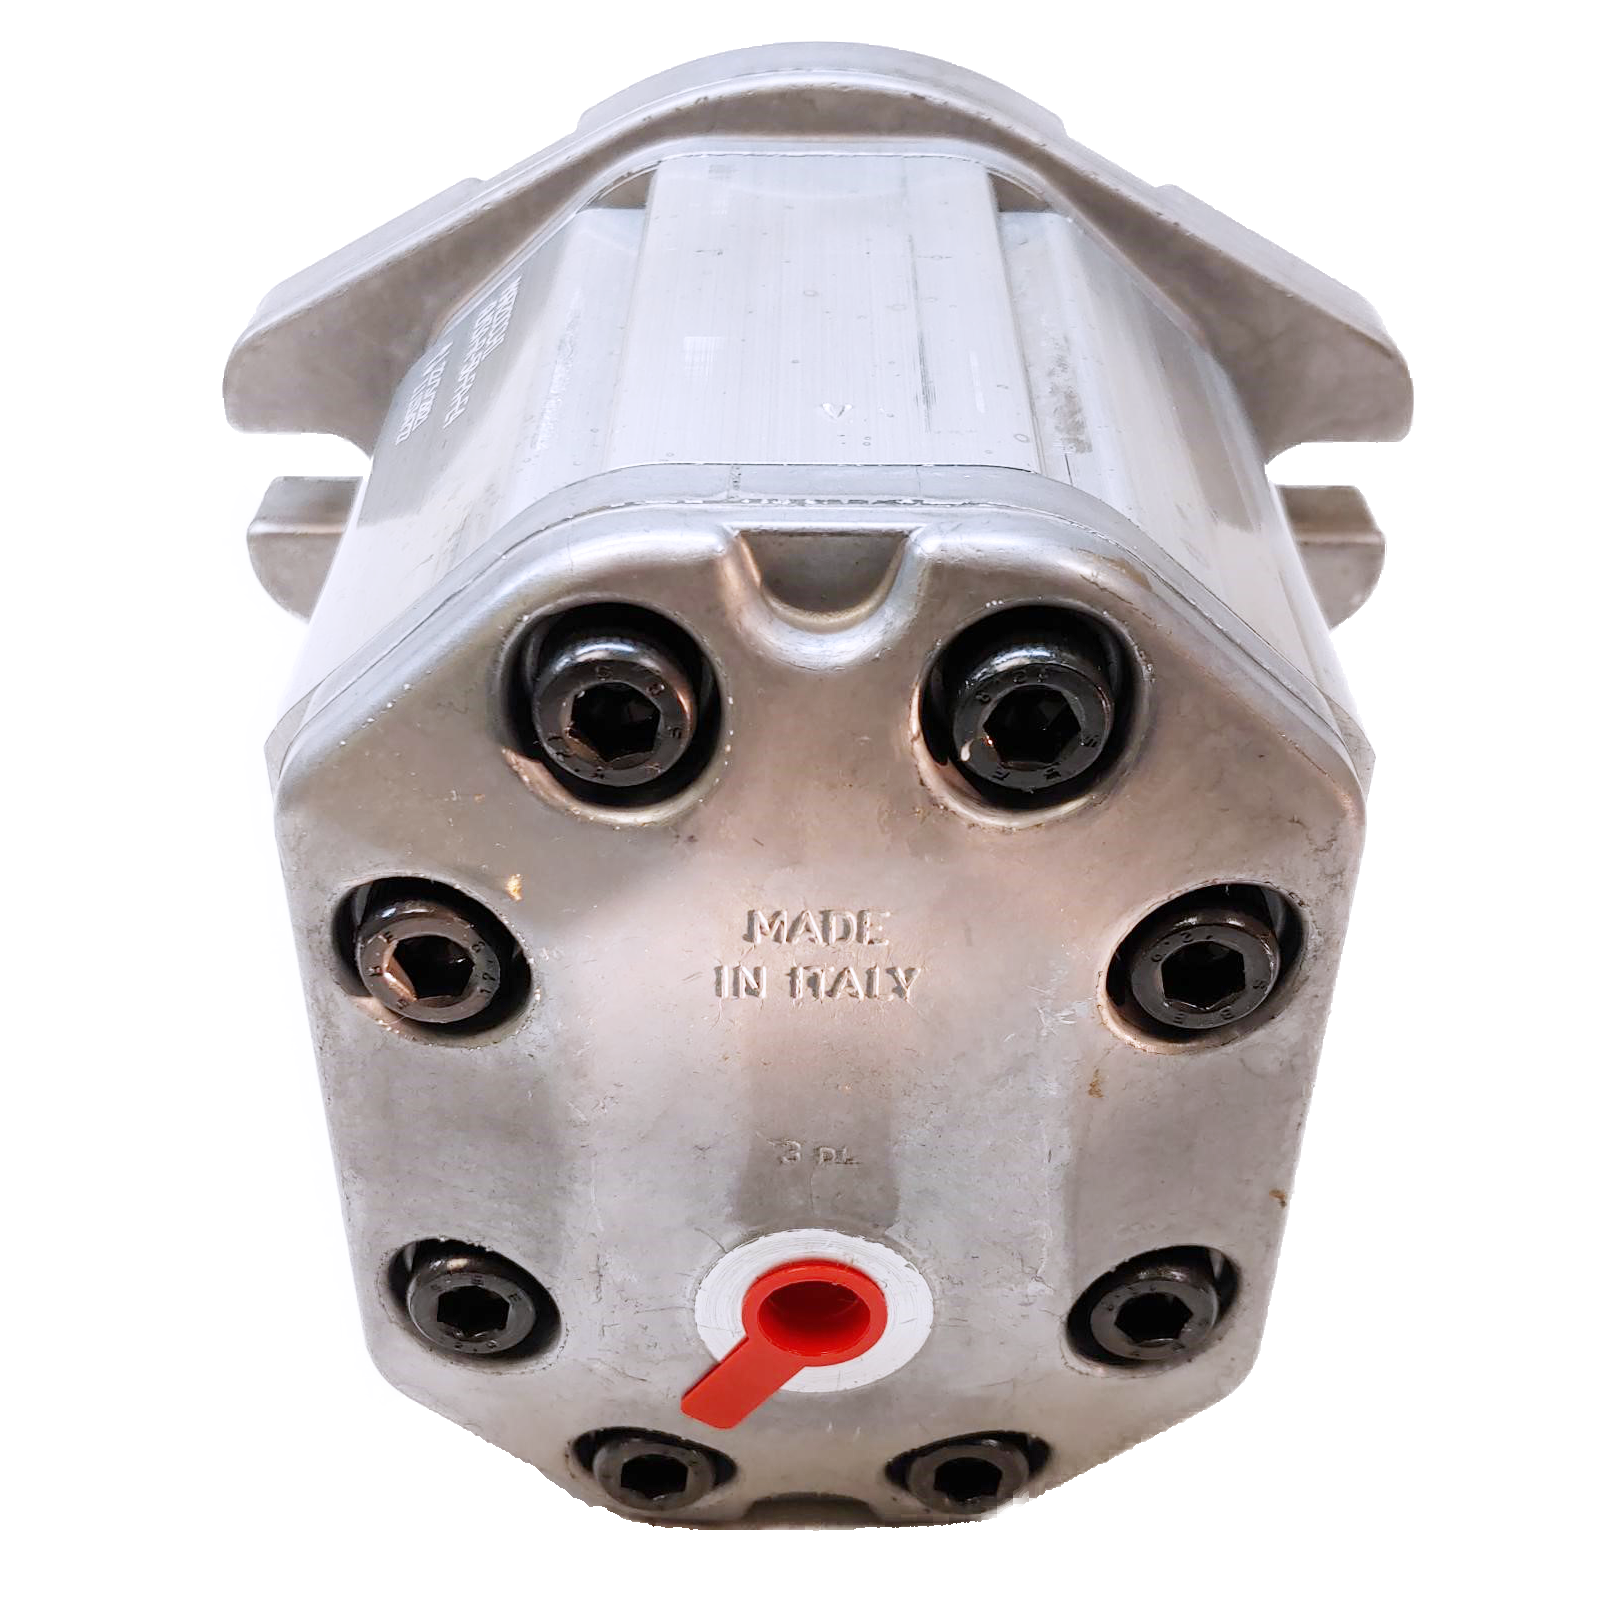 ALM3A-R-135-S1-FA-E4 : Marzocchi Gear Motor, Bidirectional, 87cc, 2030psi rated, 2000RPM, 1.5" (#24) SAE ports, 9T 16/32DP Splined Shaft